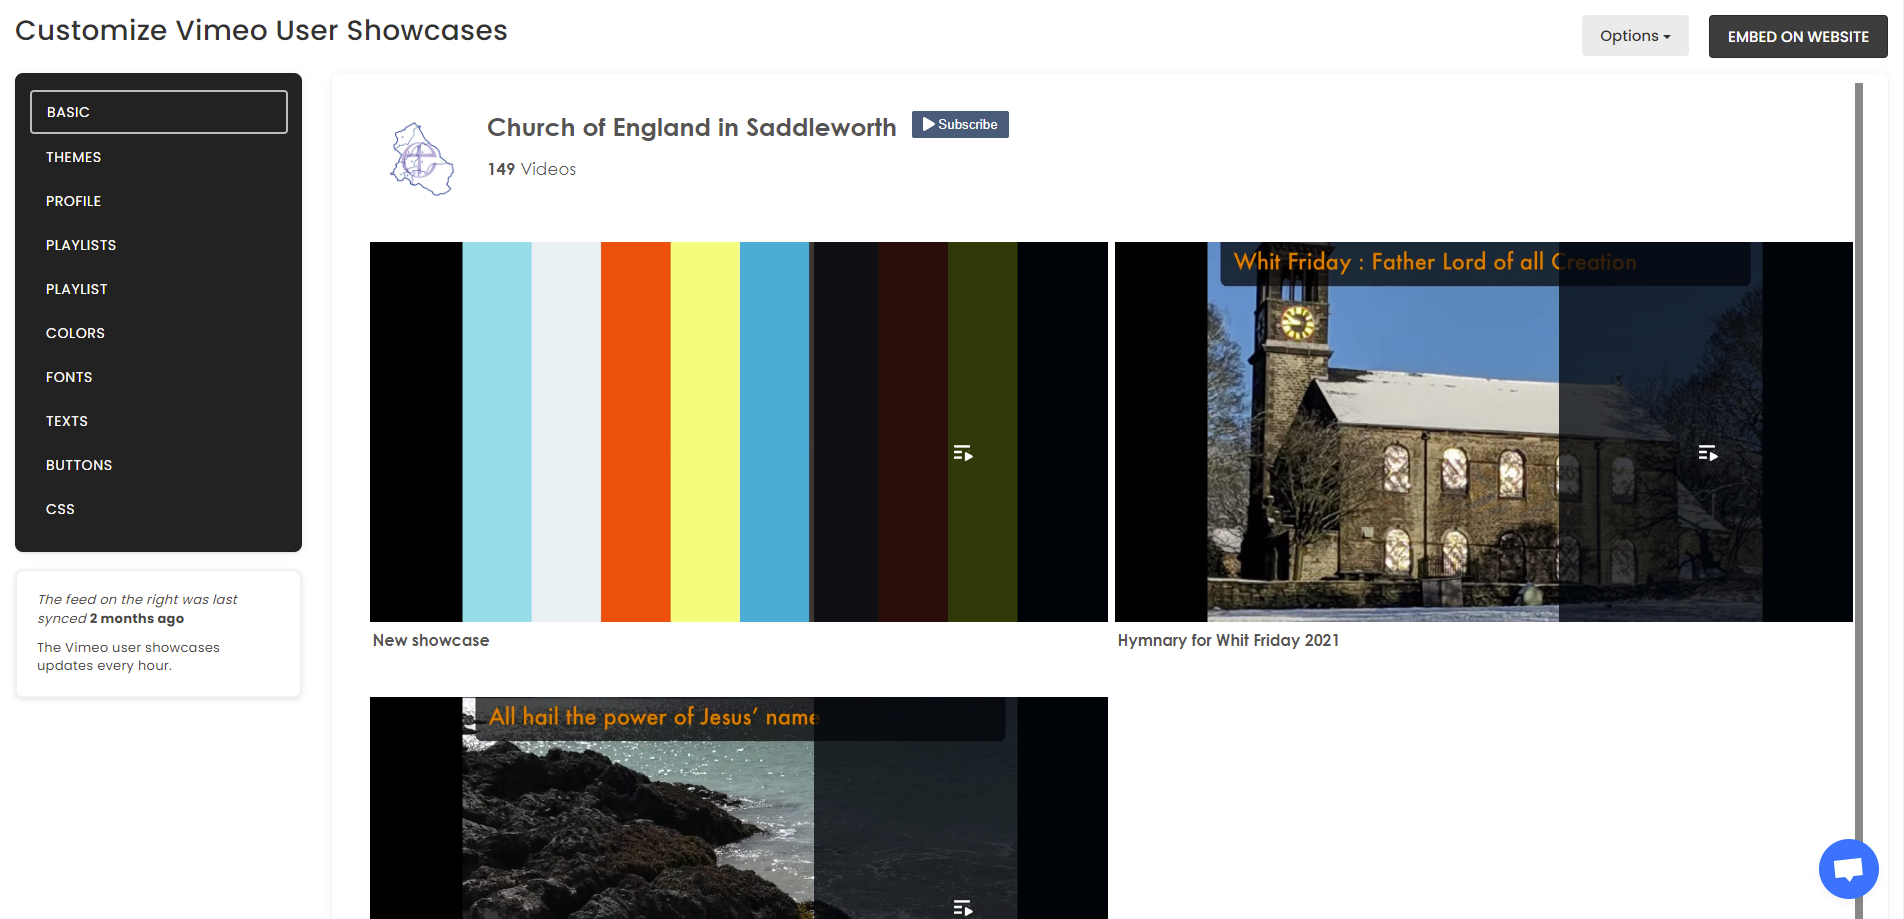 Customize your feed - Free Vimeo User Showcases Widget For Squarespace Website